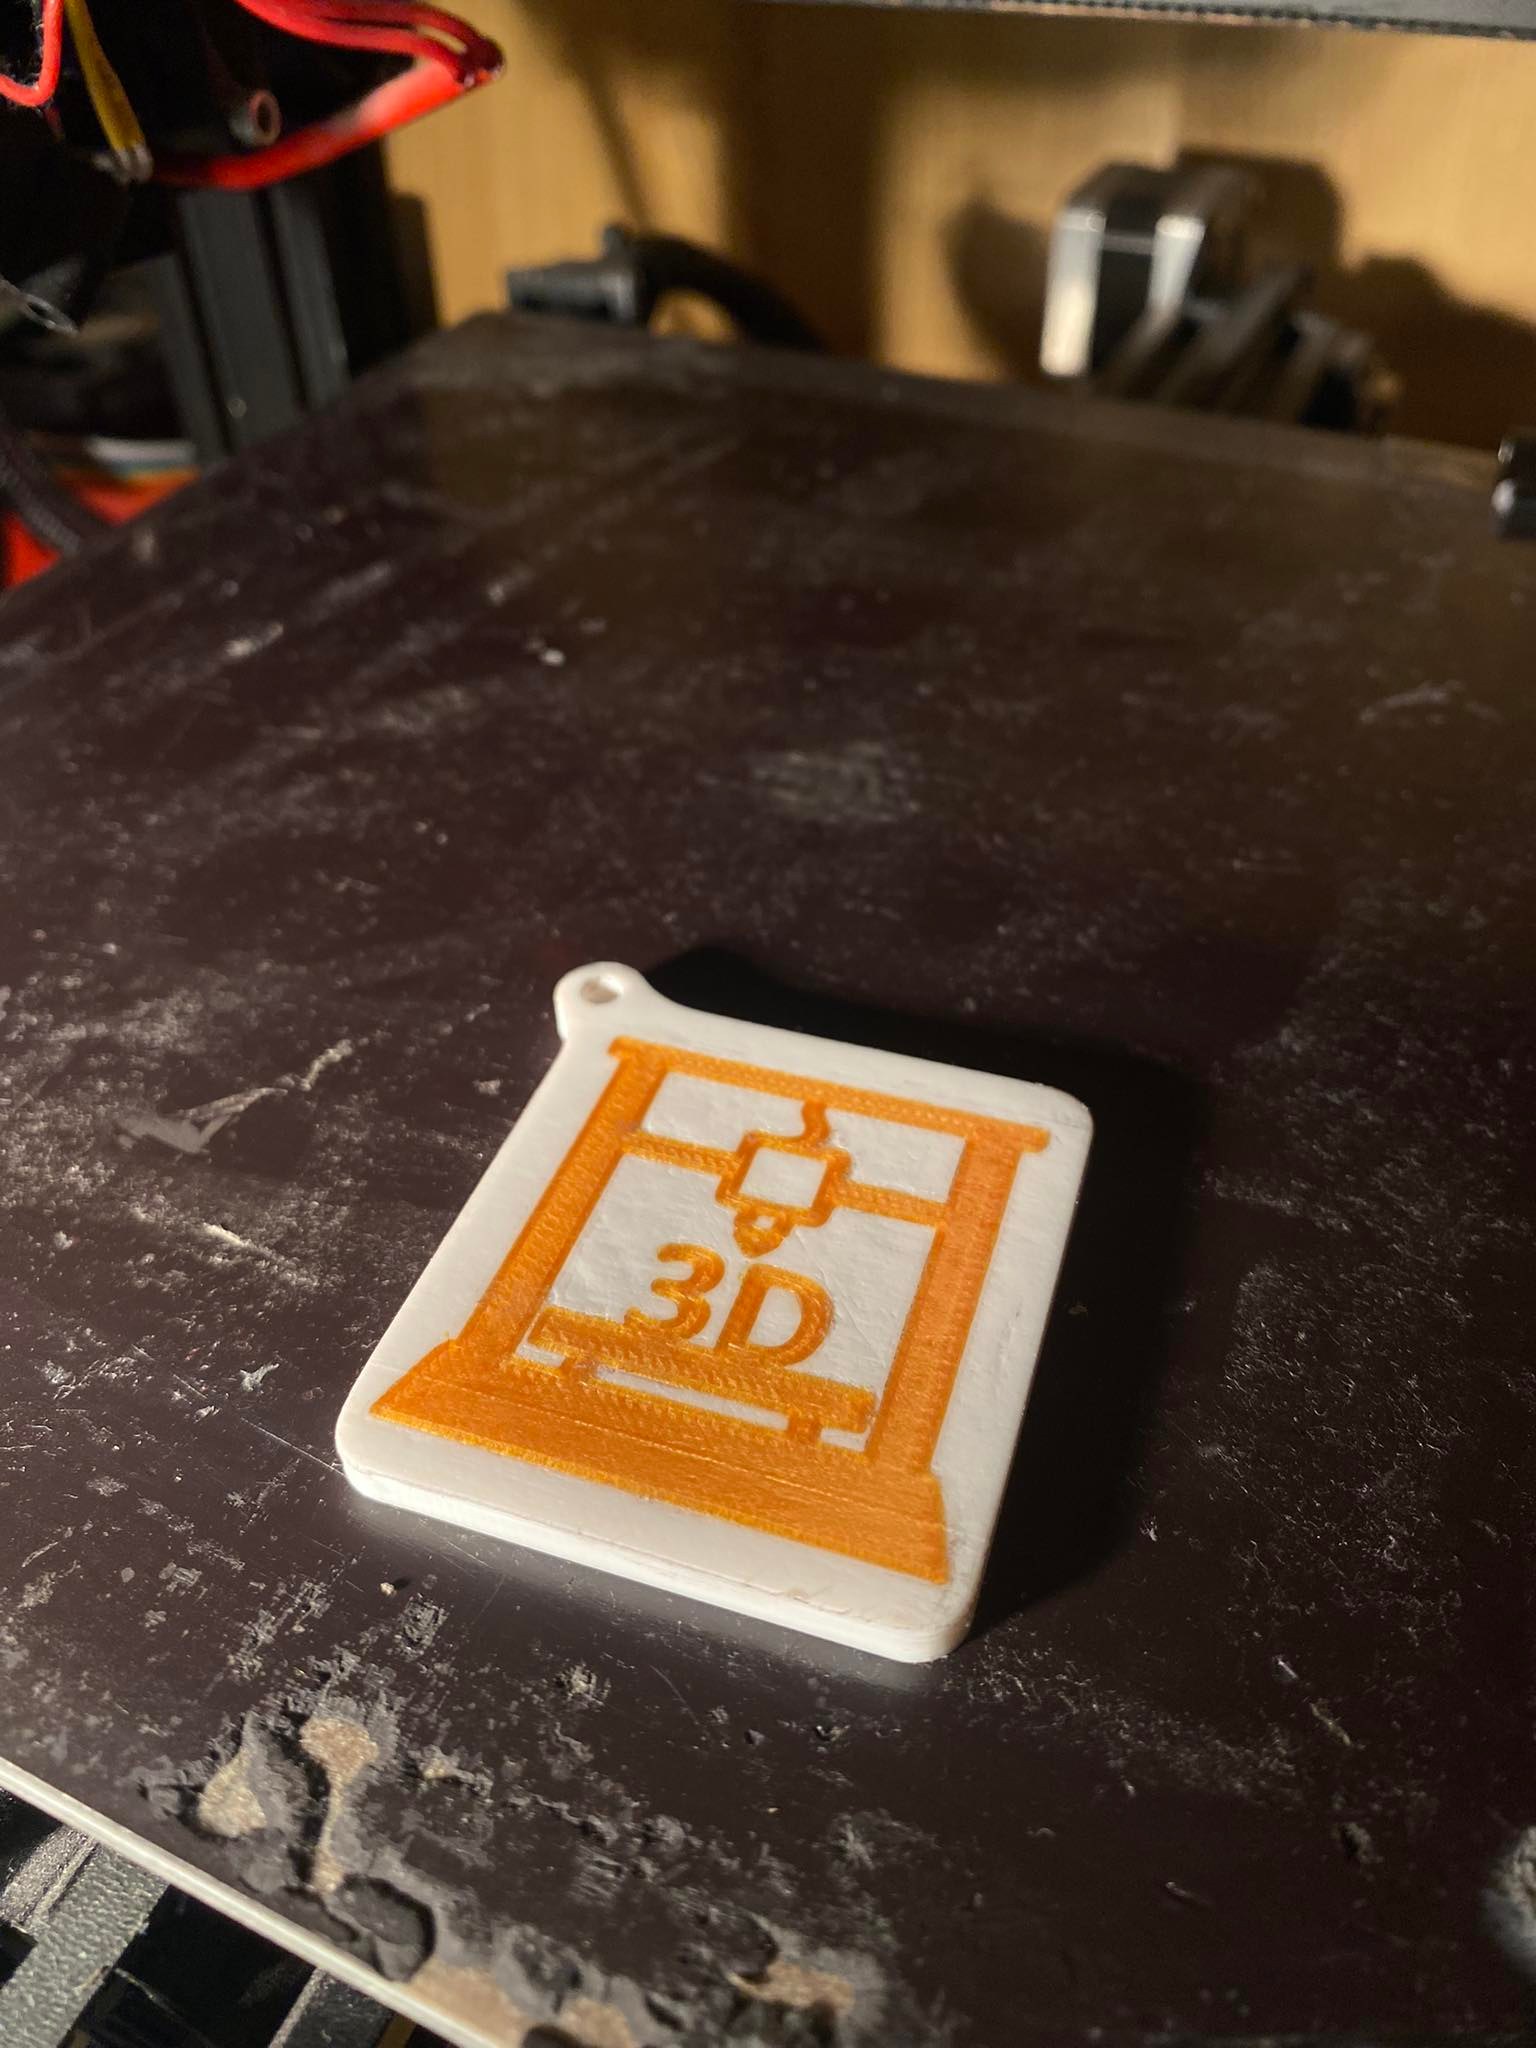 keychain with 3D printer